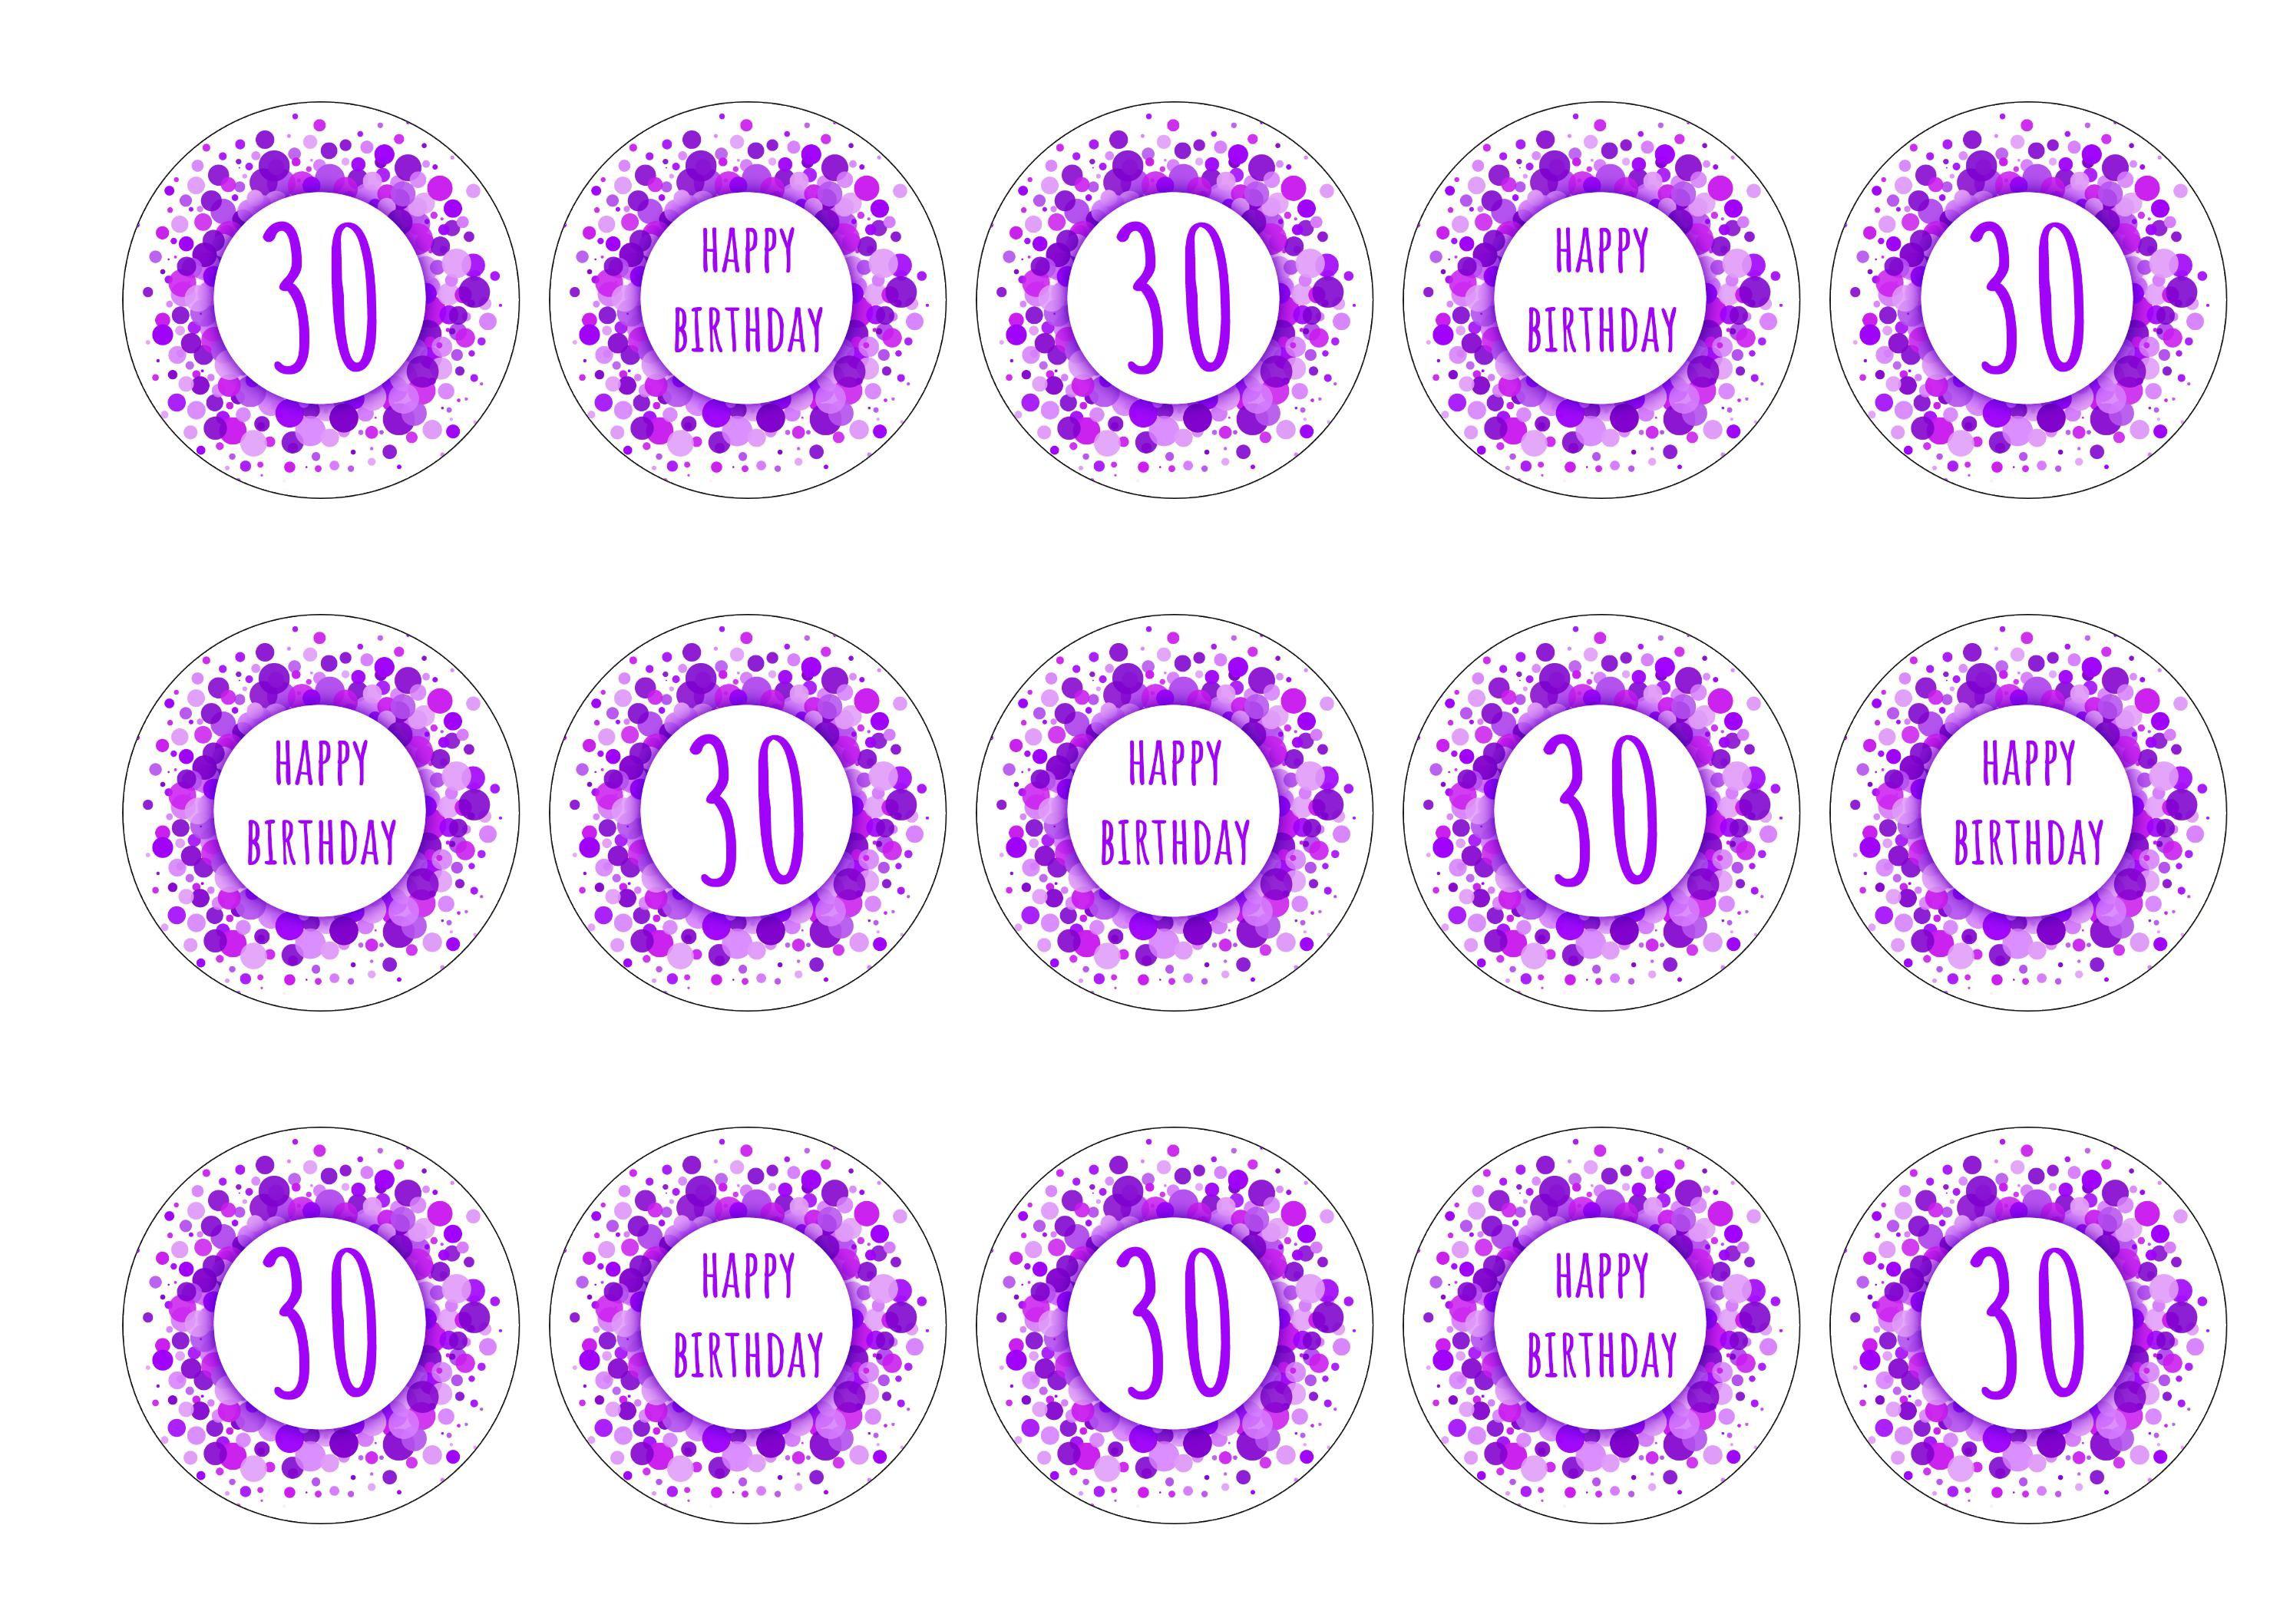 15 printed toppers in shades of purple for a 30th birthday party